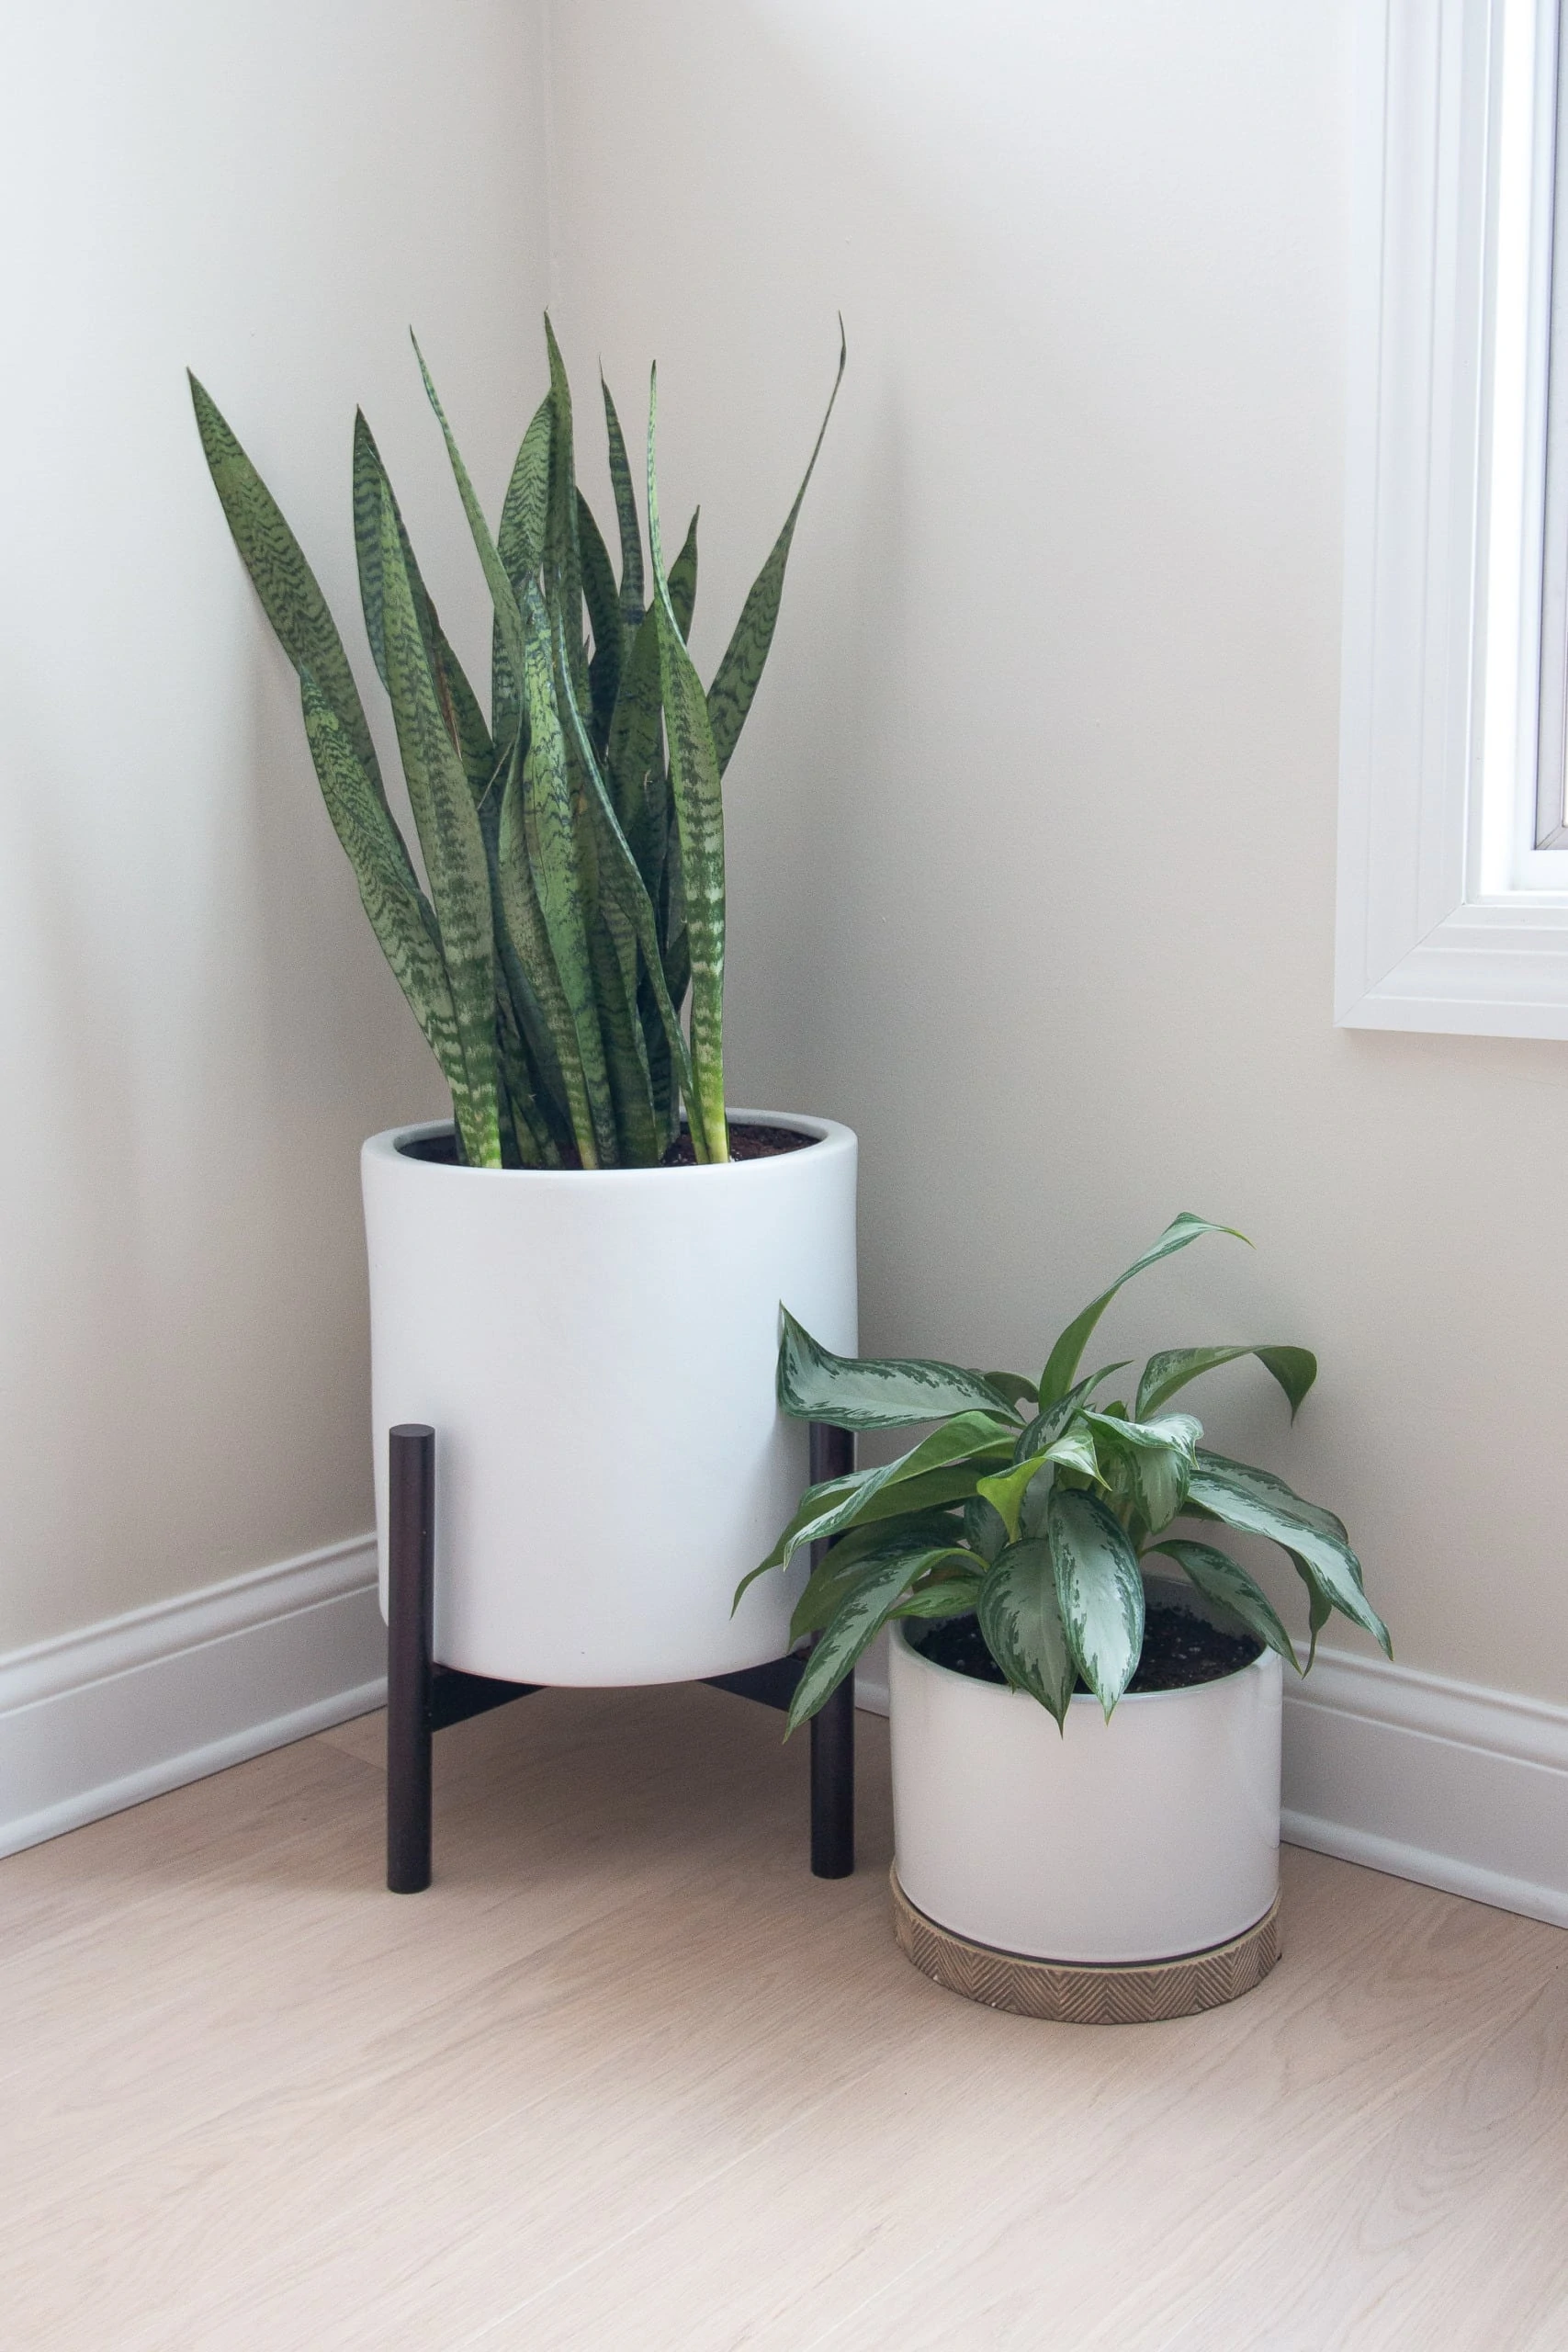 Planters from Amazon